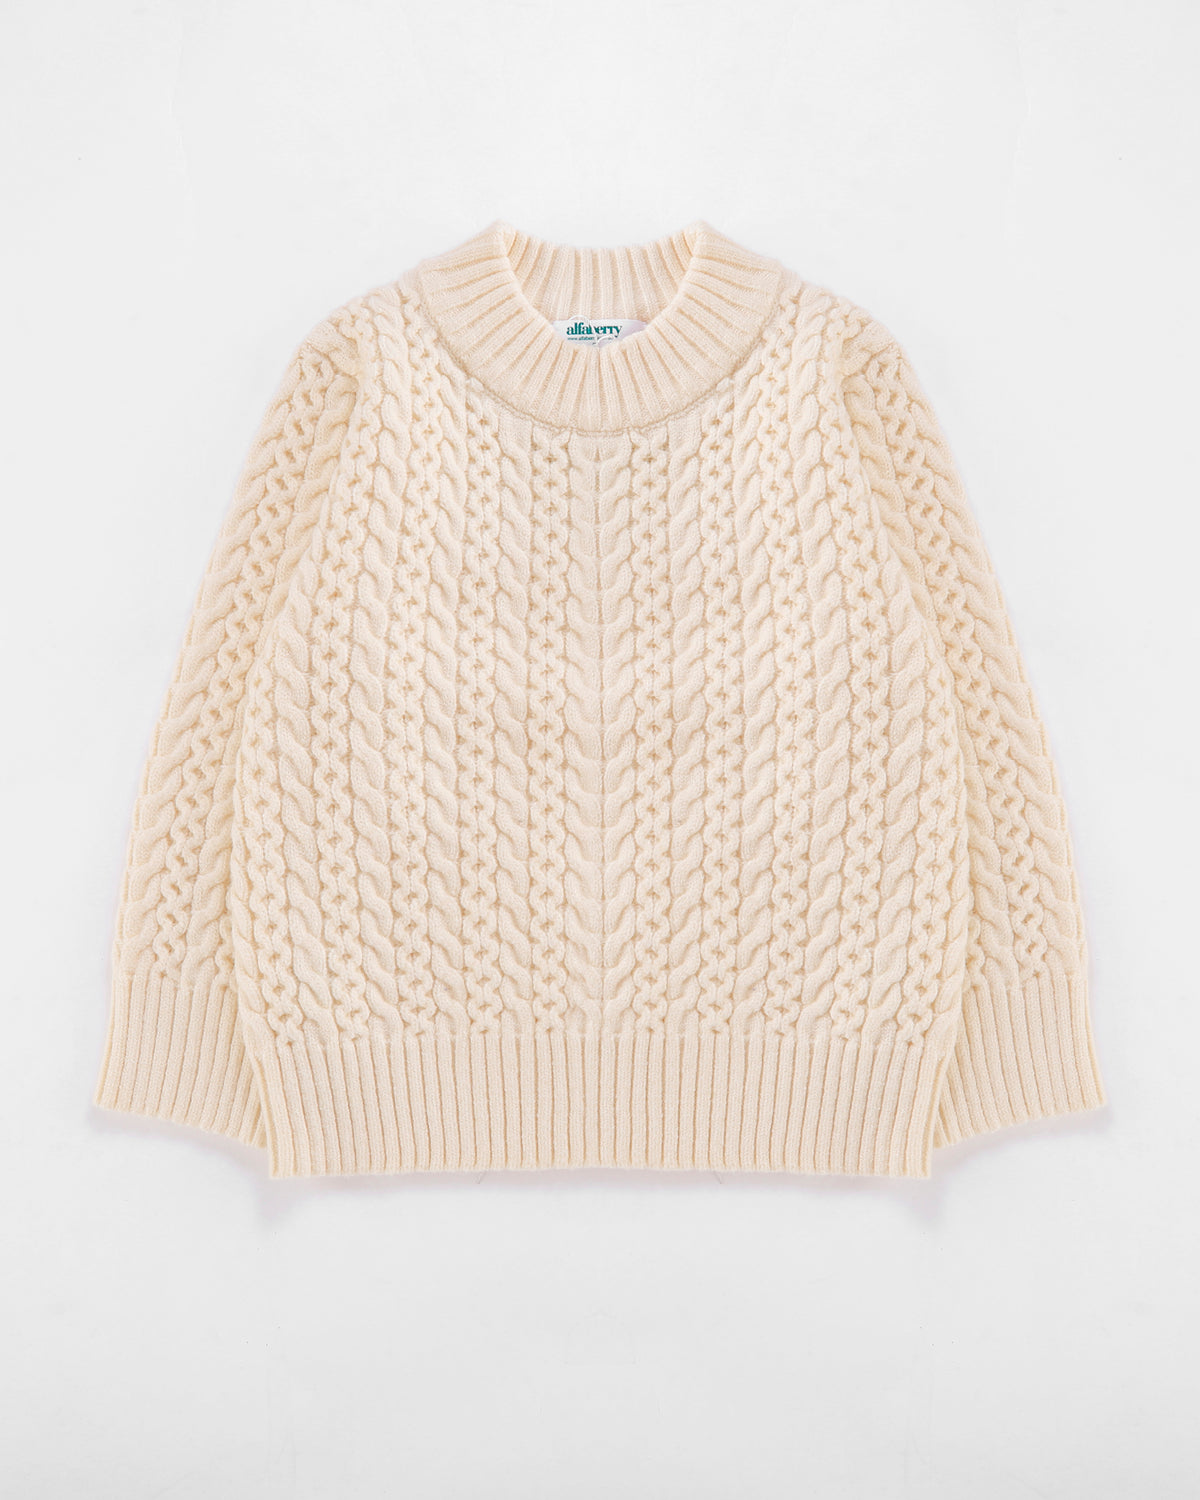 Crew Cable Knit Jumper in Cream Front